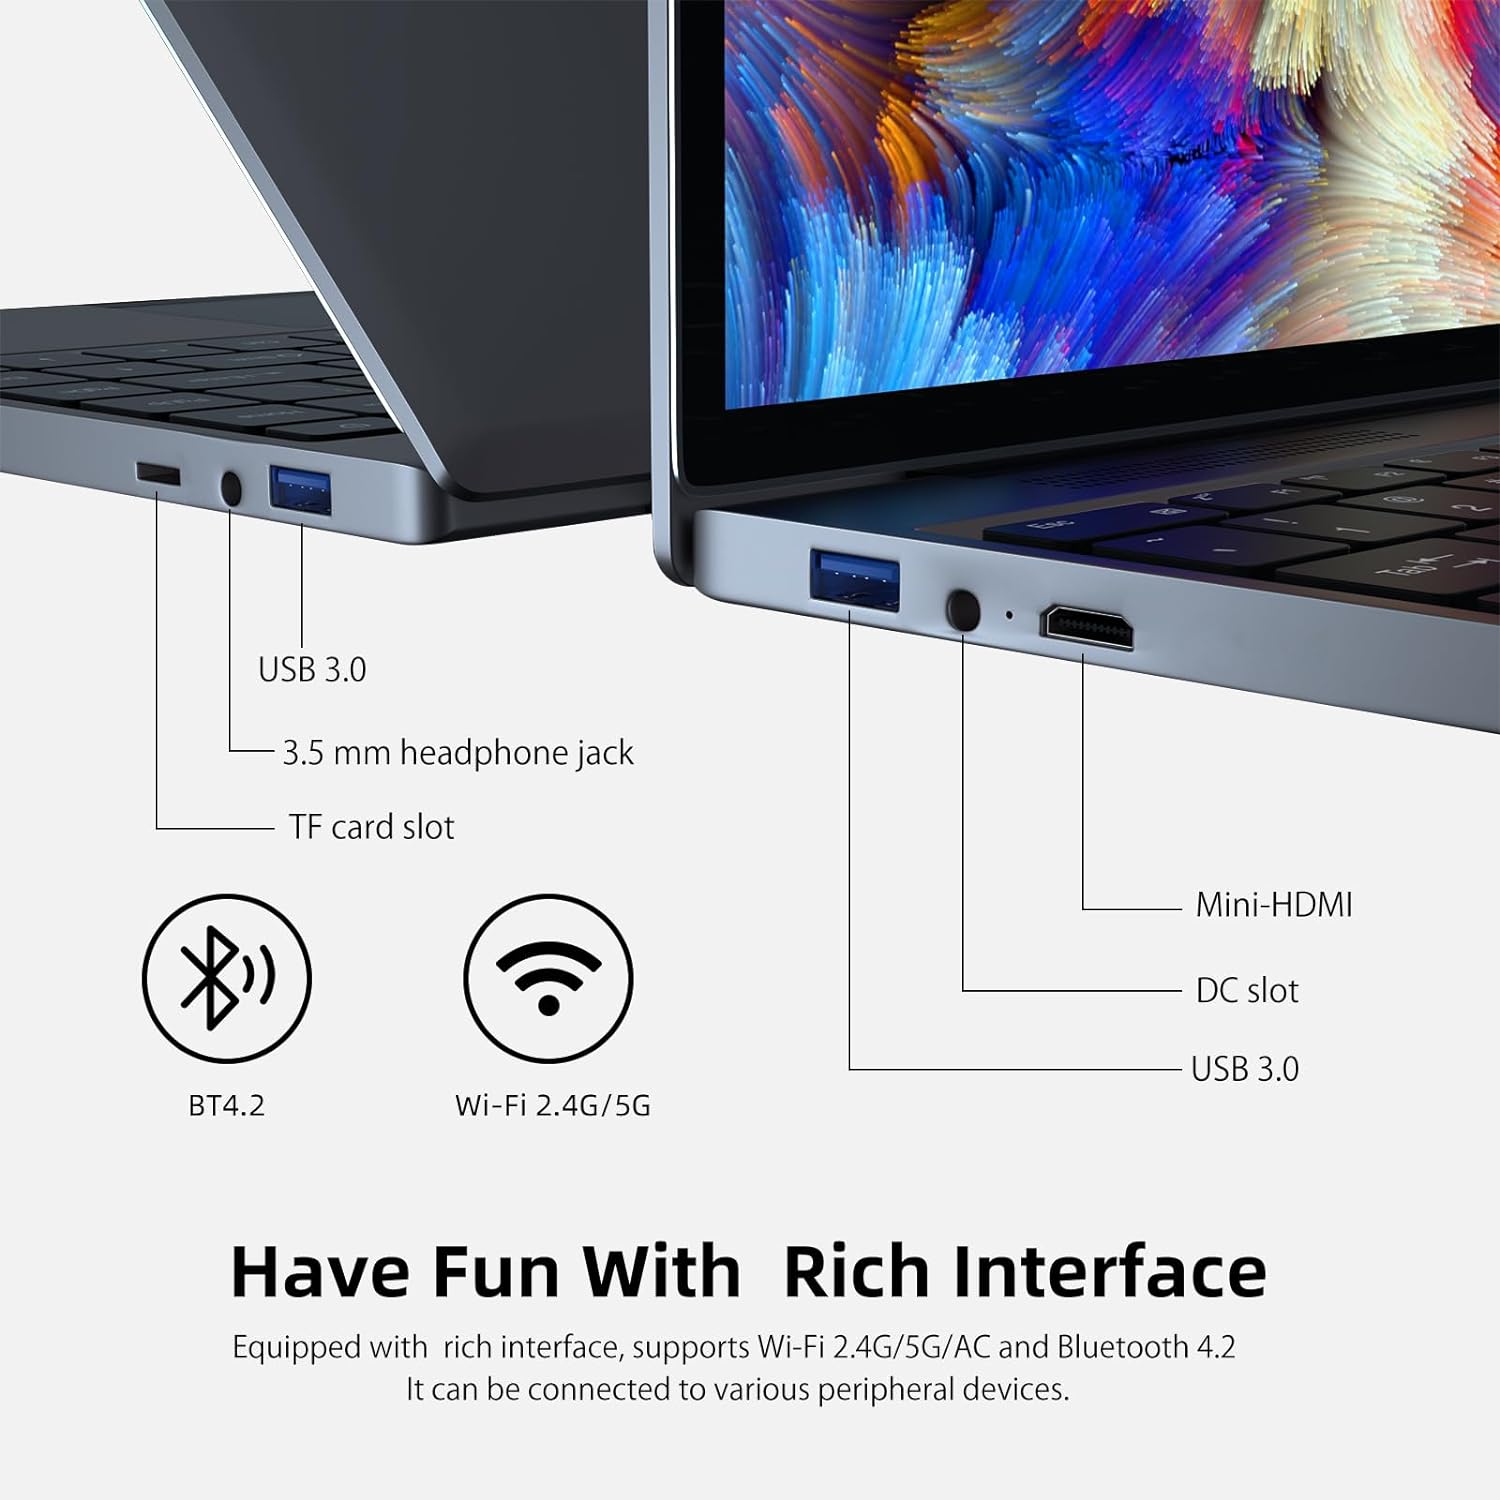 Morostron 13.5 Touch Screen Laptop, Windows 11 Laptop Computer with Intel N5095, 16GB RAM 512GB SSD, 3000x2000 FHD, Backlit Keyboard, Touch ID, WIFI, USB3.0*2, Bluetooth 4.2, HDMI, 38WH Battery, Gray